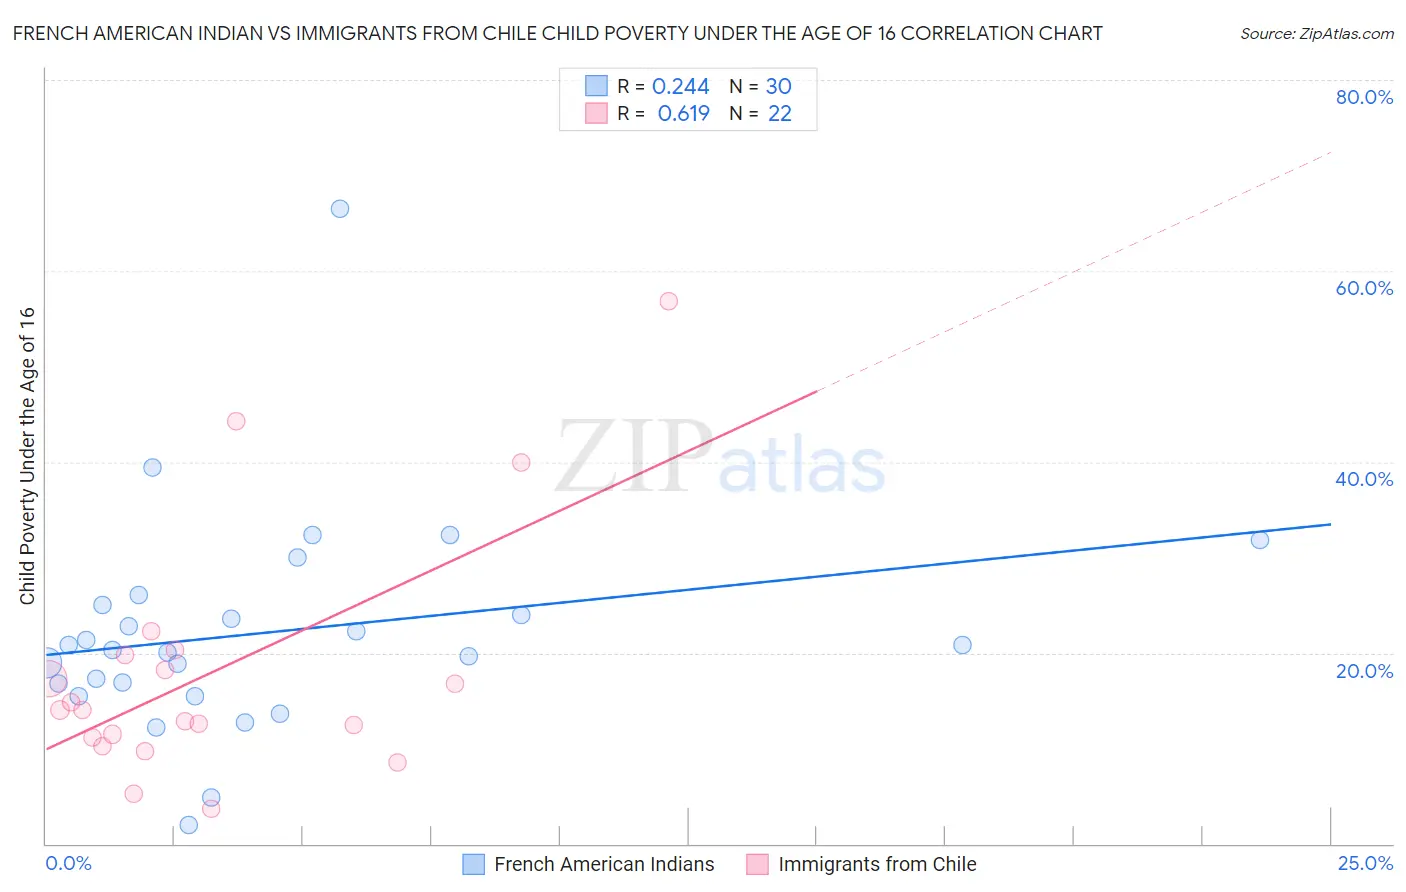 French American Indian vs Immigrants from Chile Child Poverty Under the Age of 16